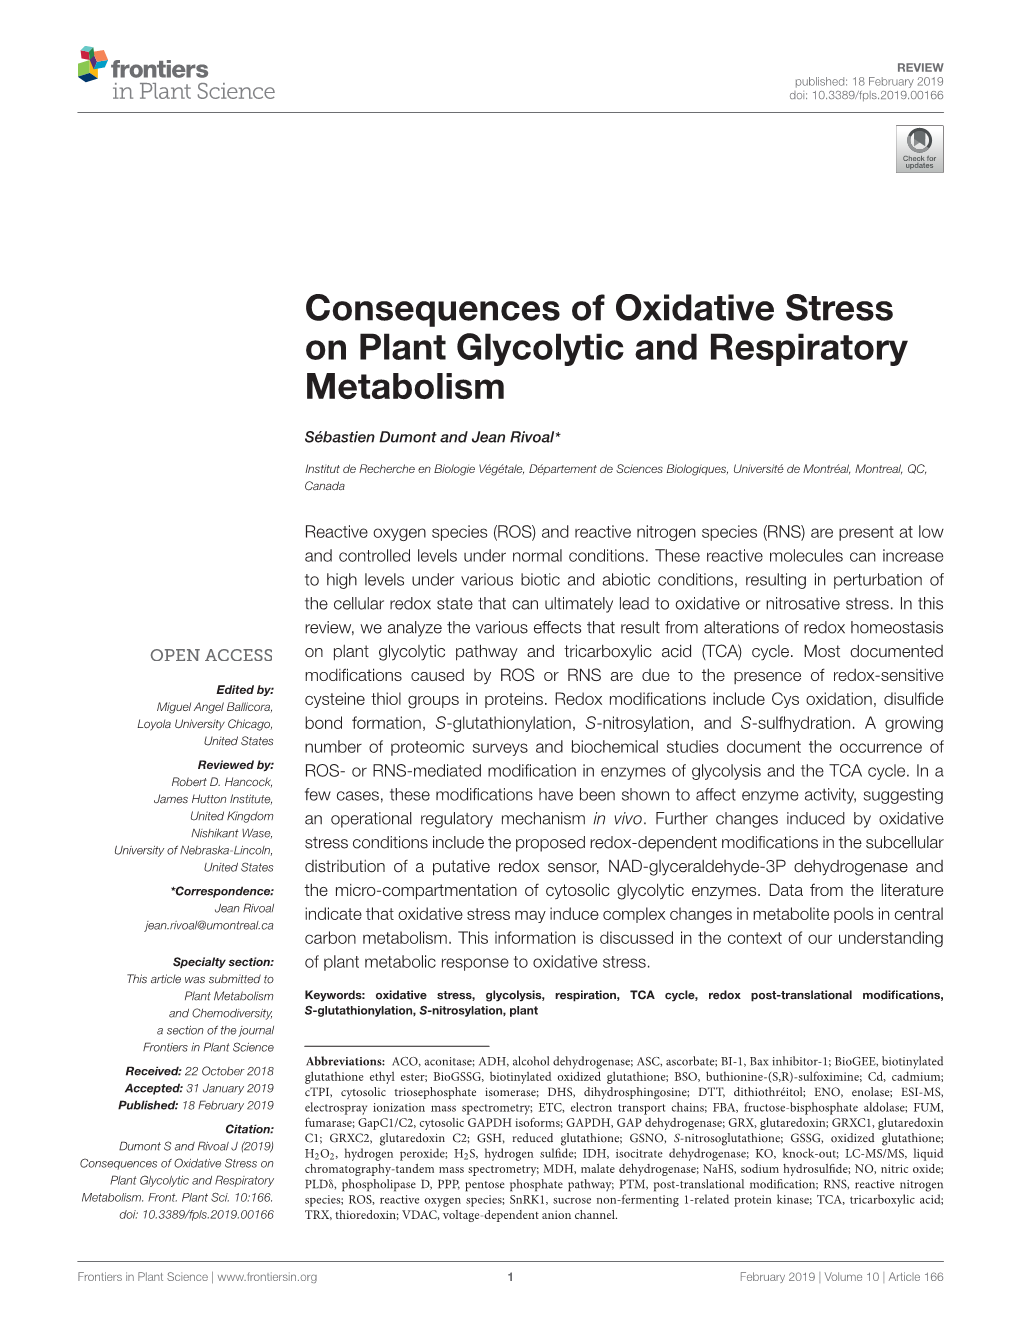 Consequences of Oxidative Stress on Plant Glycolytic and Respiratory Metabolism